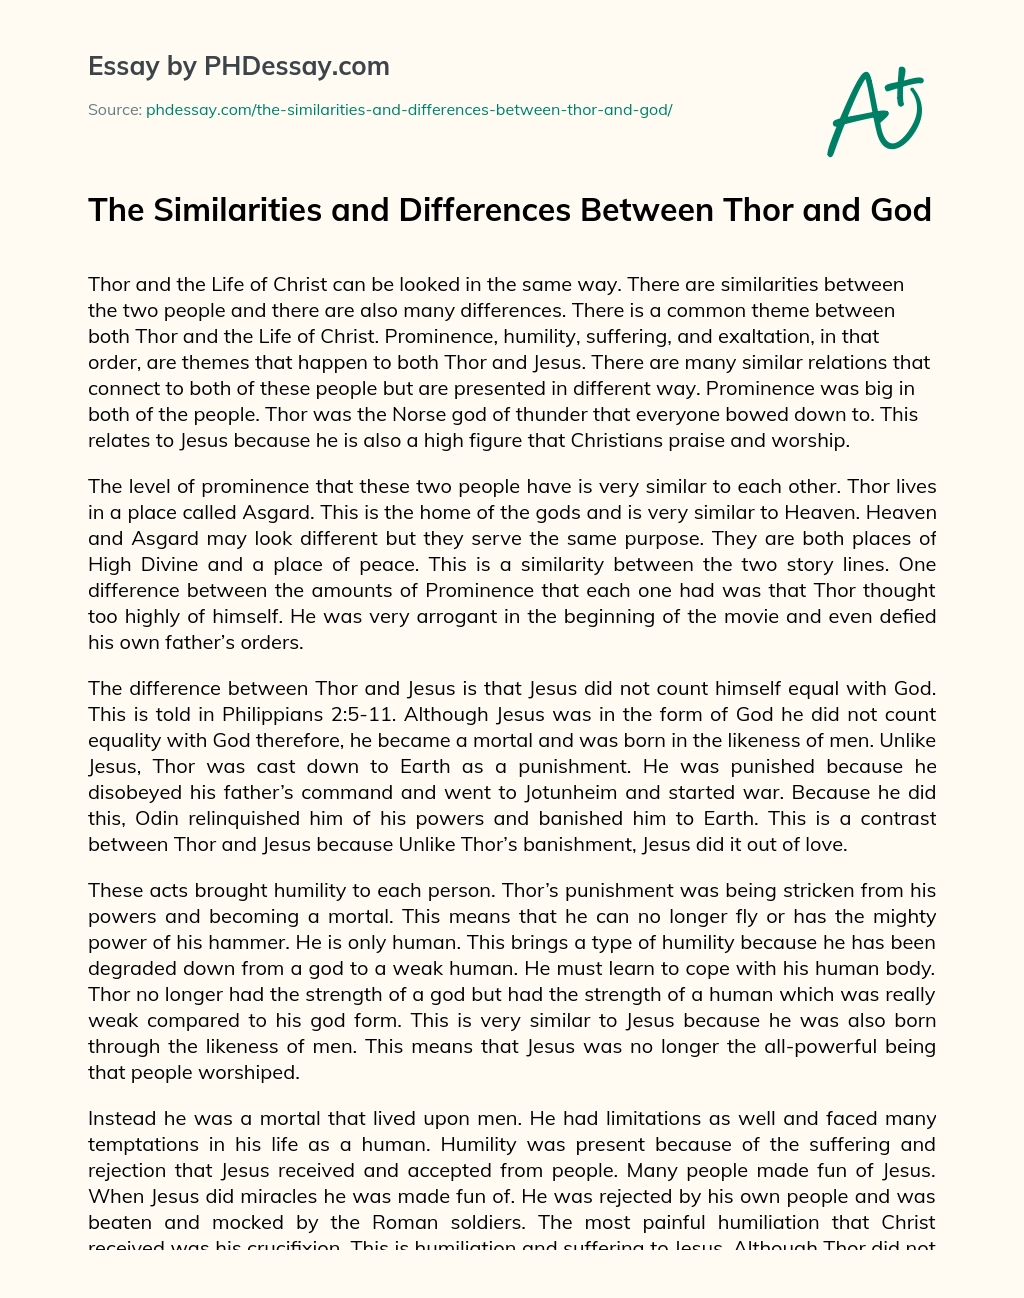 The Similarities and Differences Between Thor and God essay